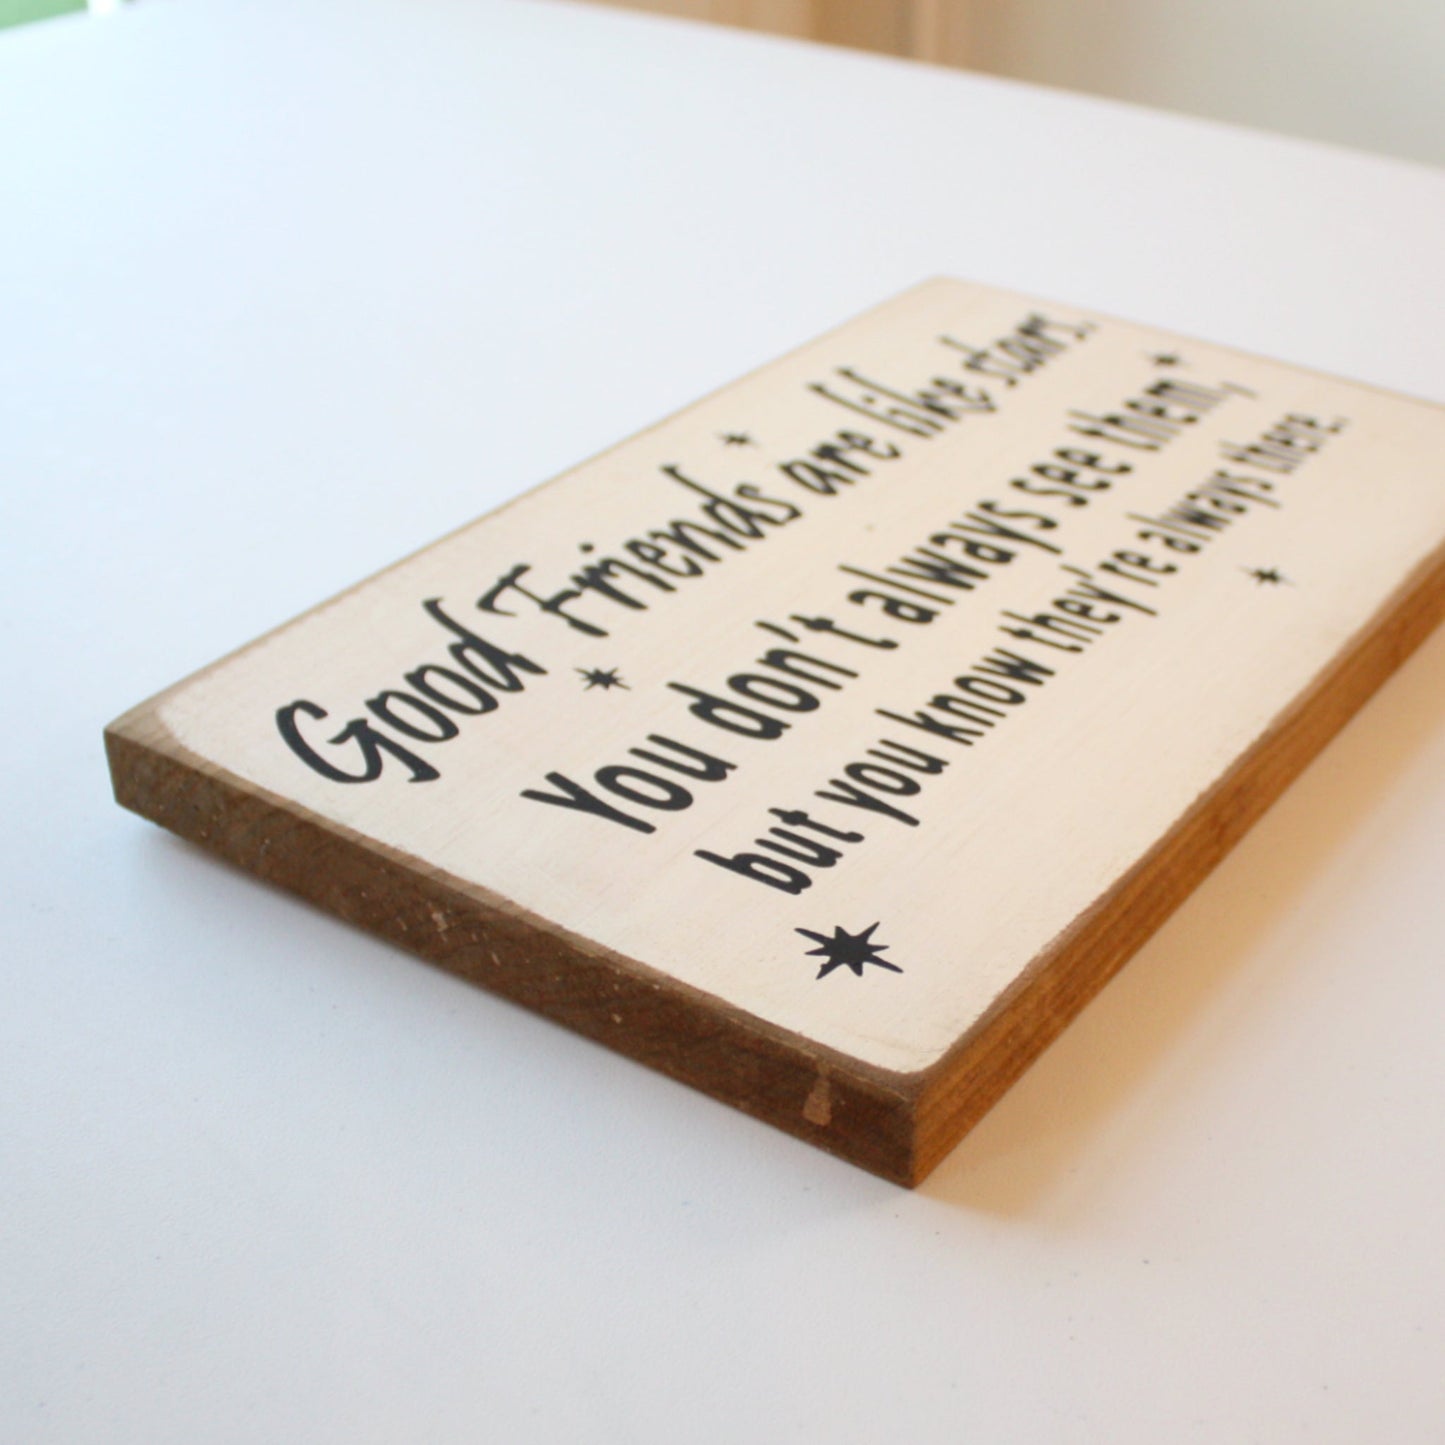 Good Friends are Like Stars - Wood Sign - Made in the USA